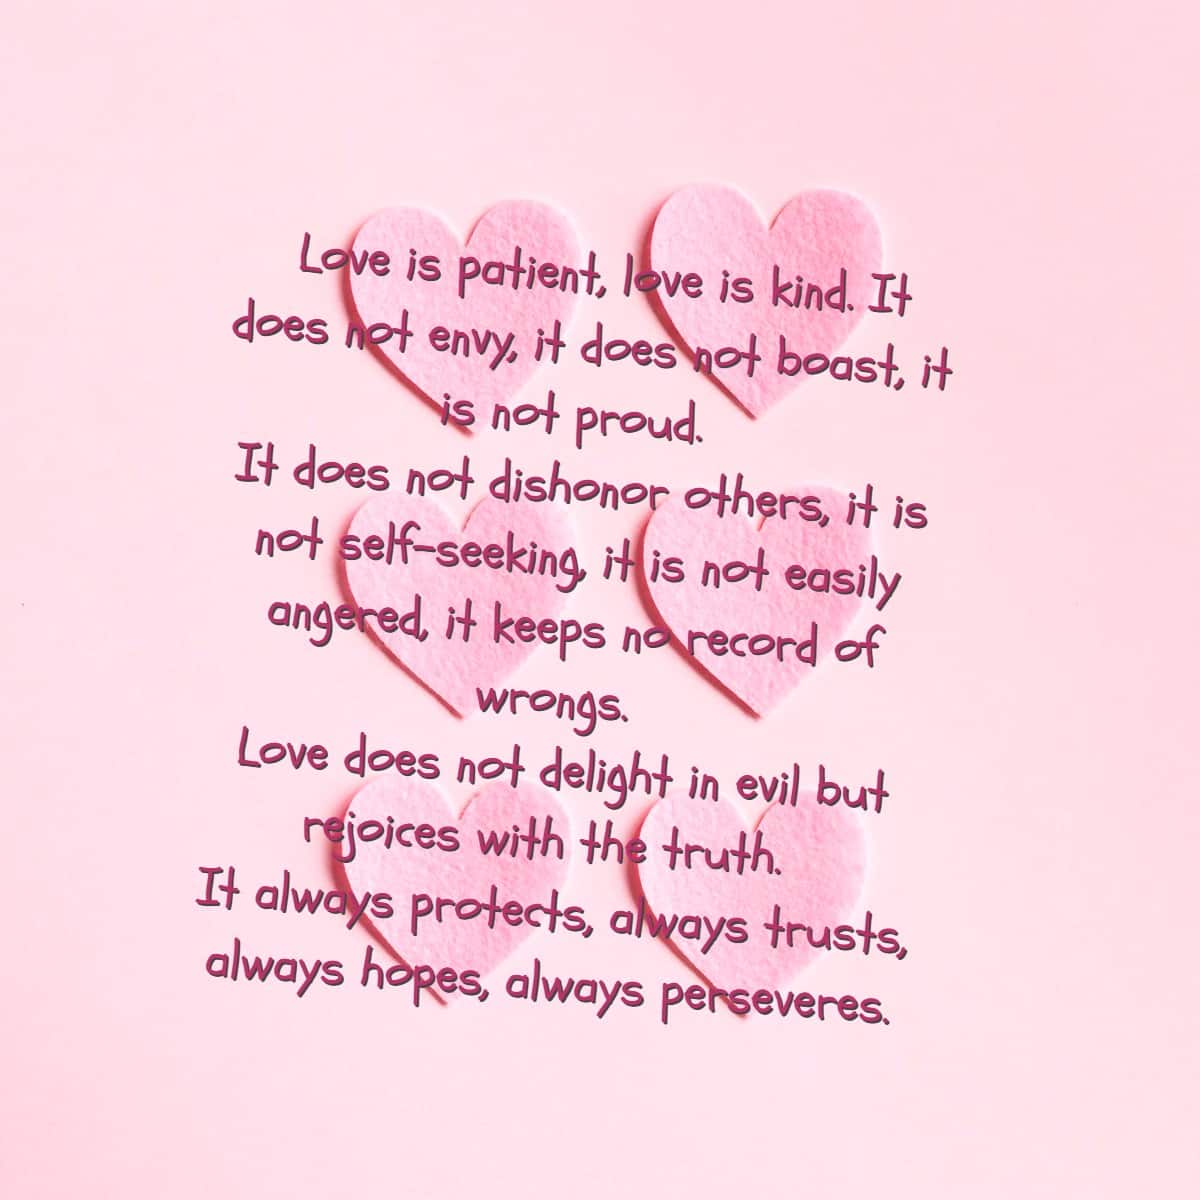 love-is-patient-love-is-kind